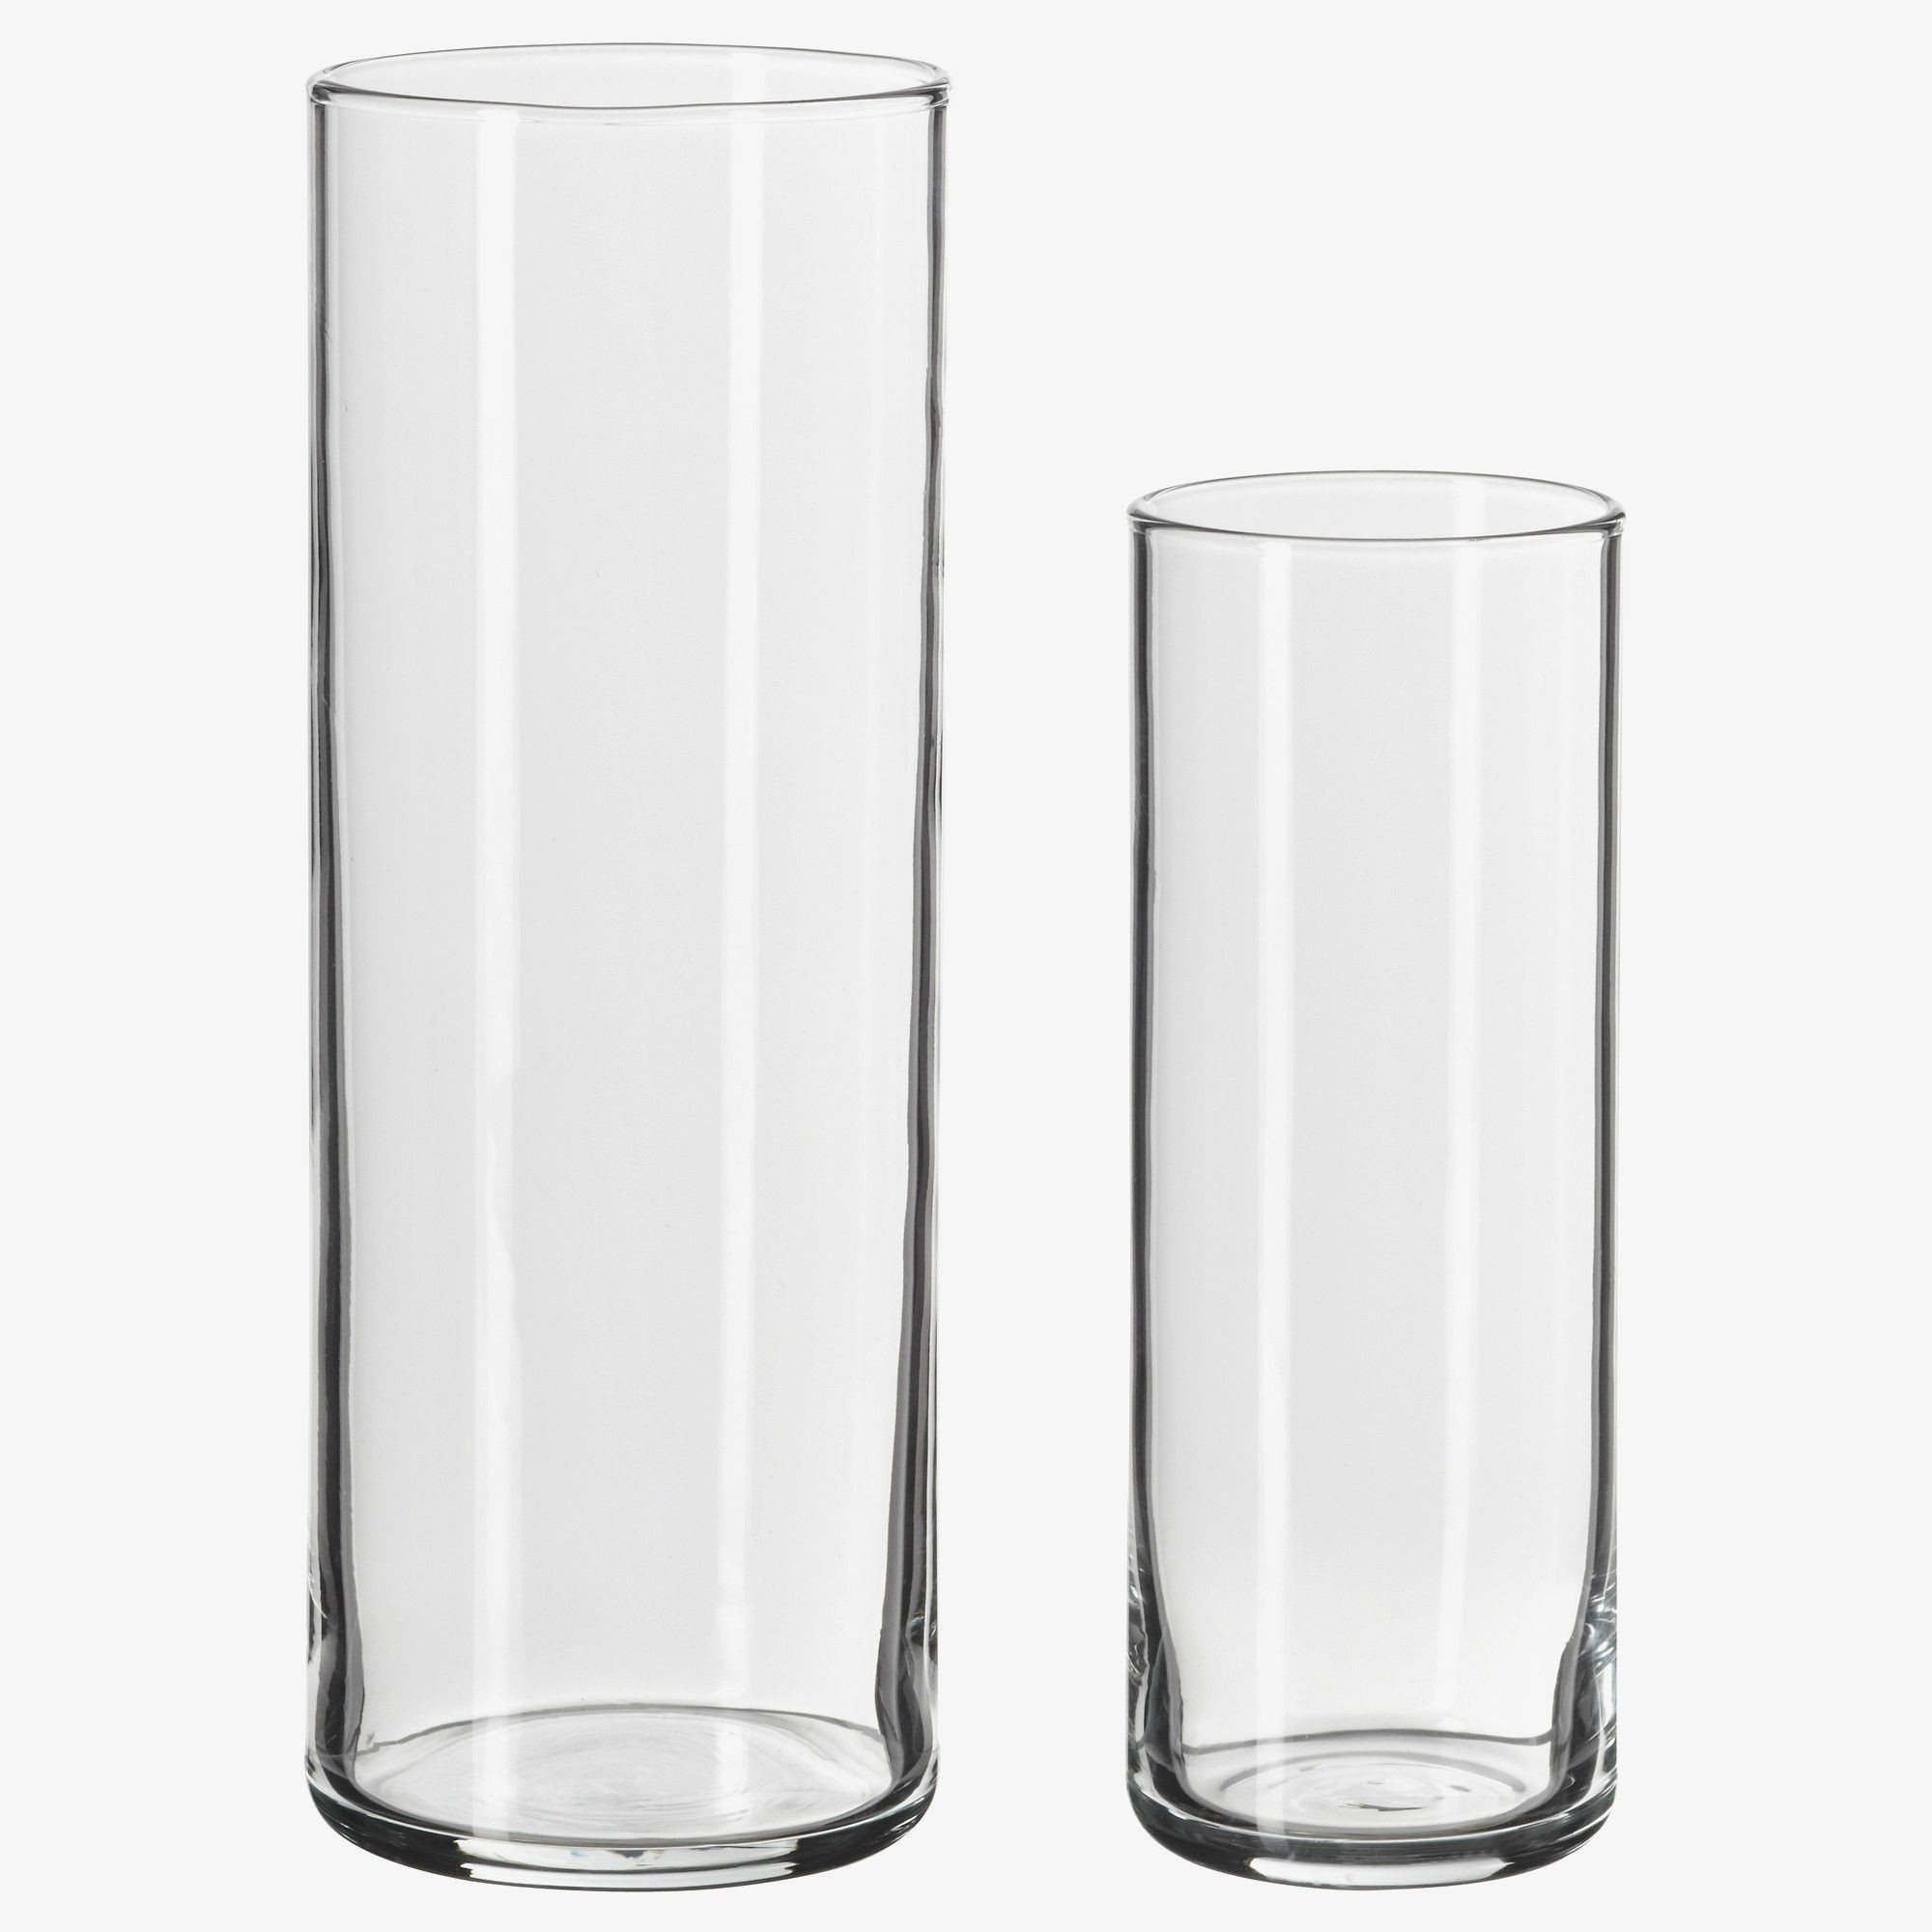 21 Unique Milk Glass Vases wholesale 2024 free download milk glass vases wholesale of 40 glass vases bulk the weekly world within clear glass tv stand charming new design ikea mantel great pe s5h